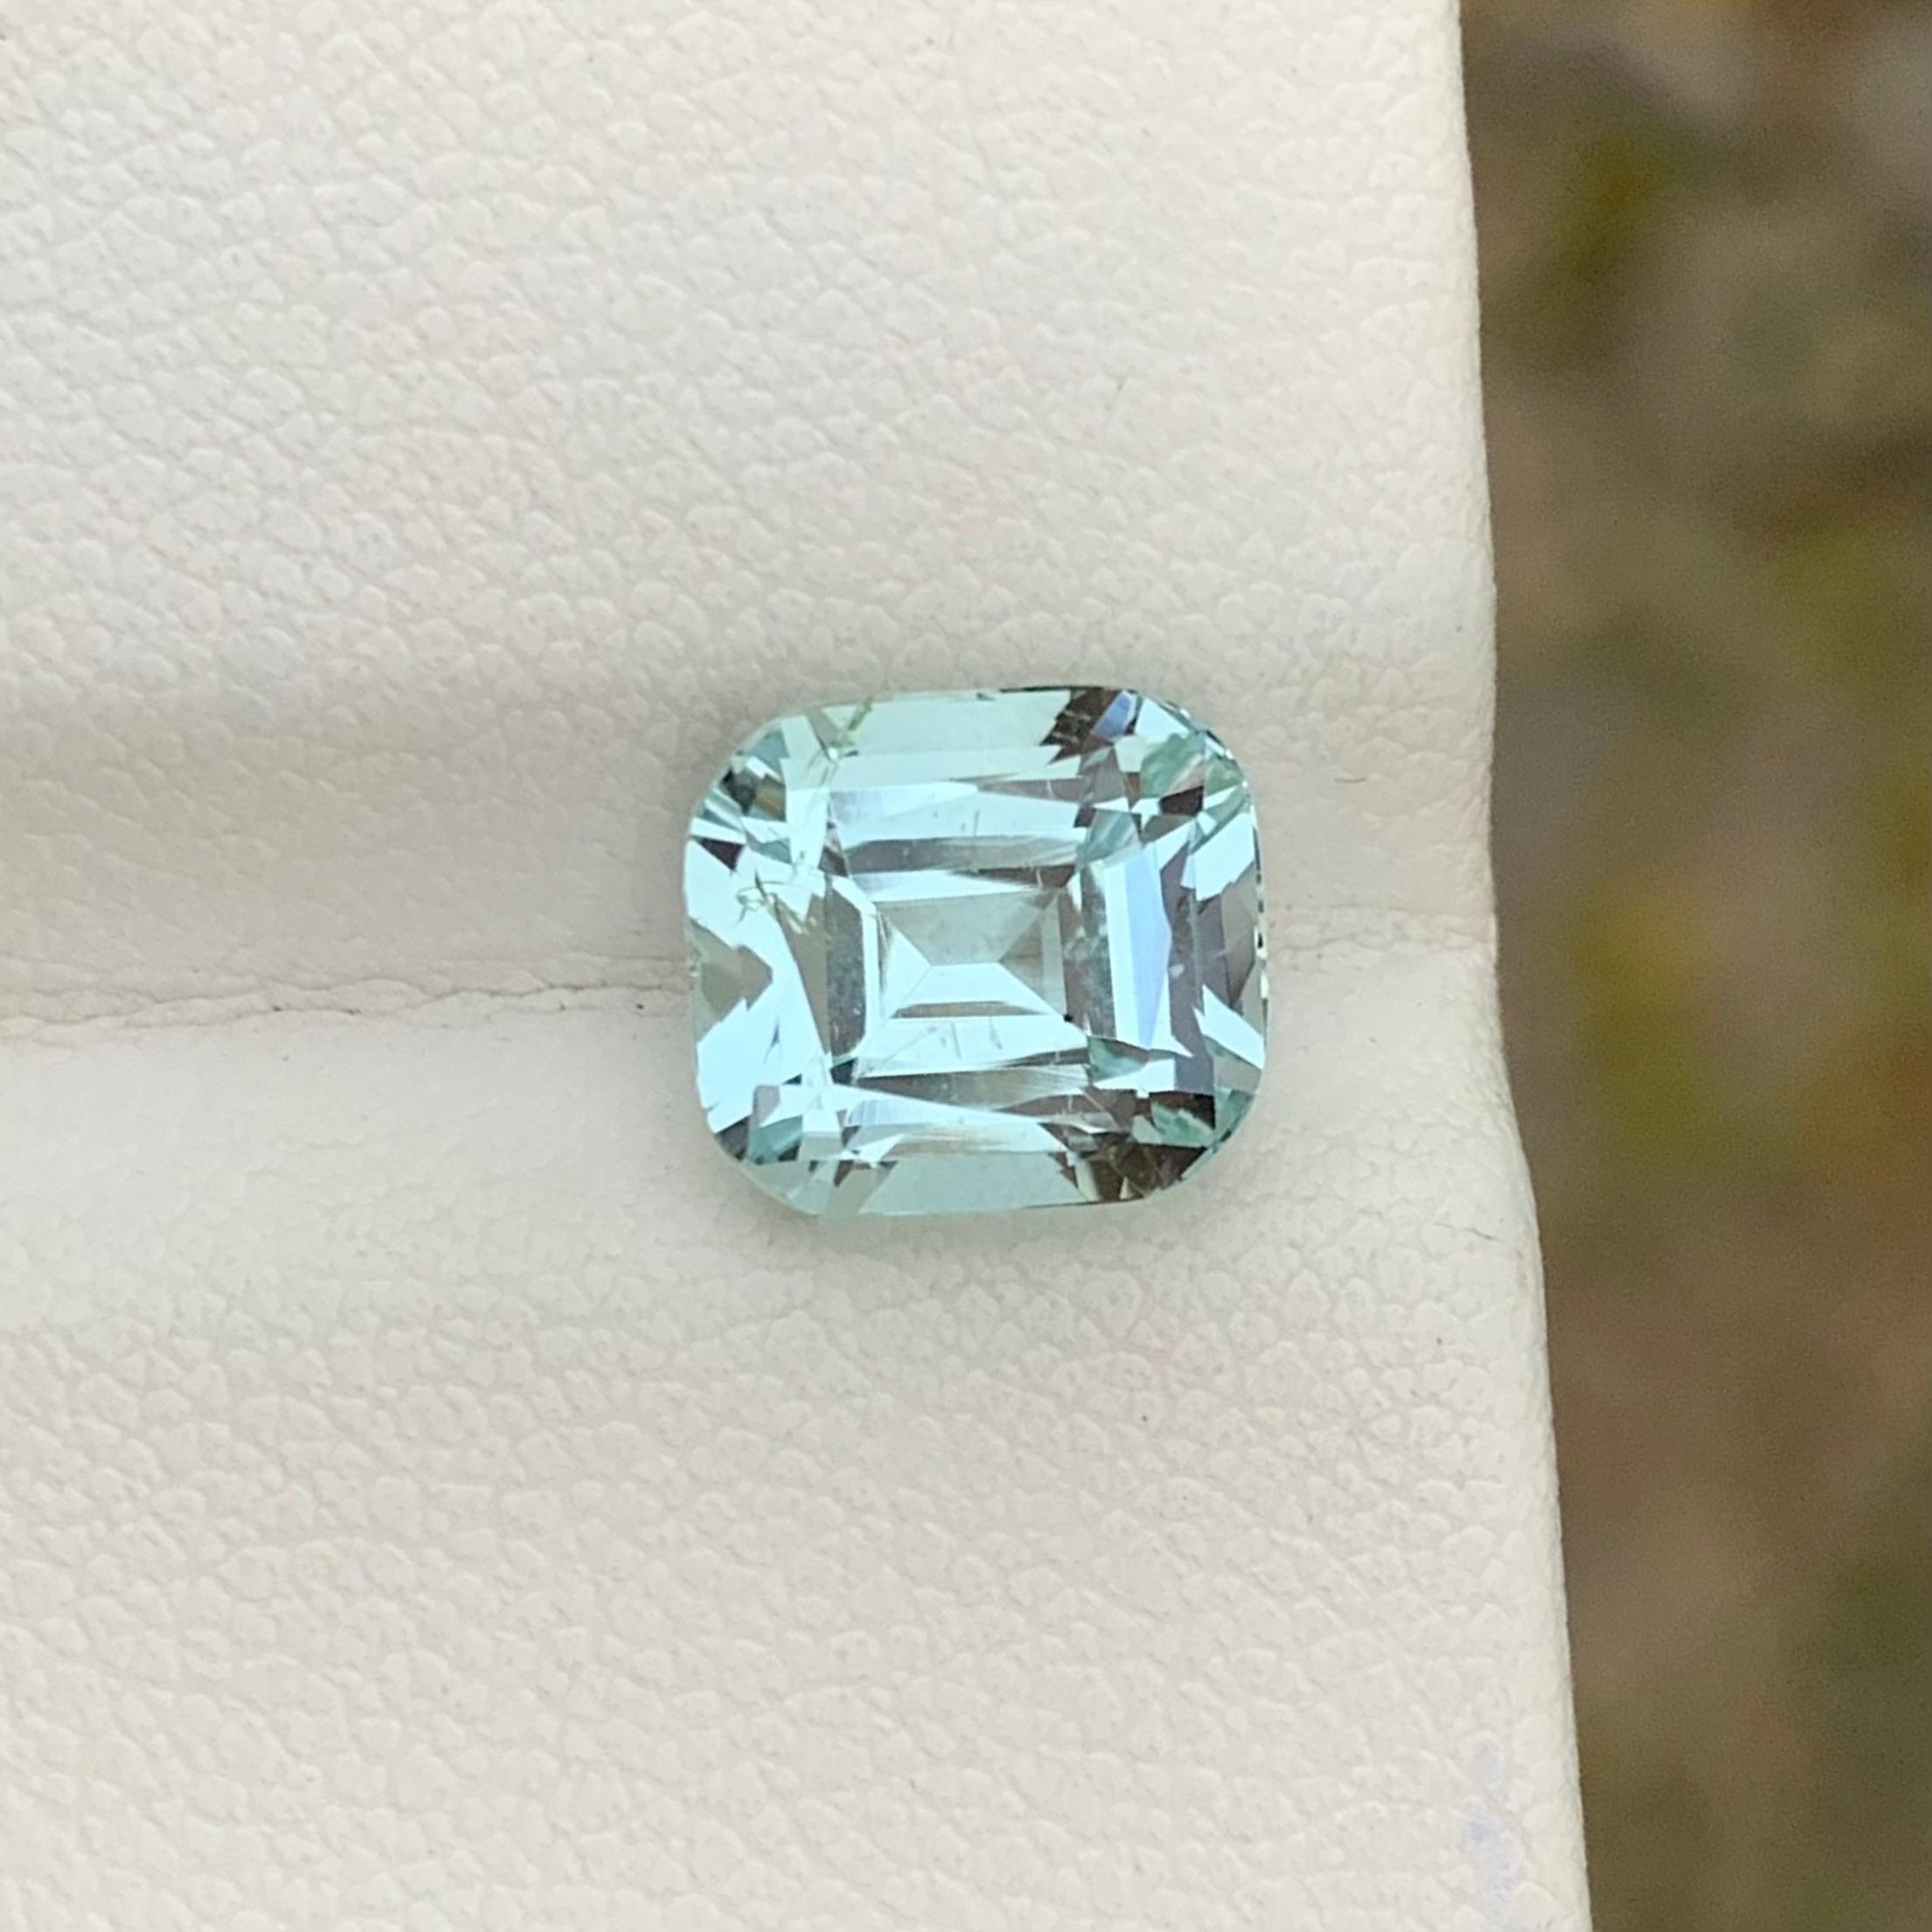 3.55 Carats Natural Loose Aquamarine Ring Gem From Shigar Valley Mine For Sale 6